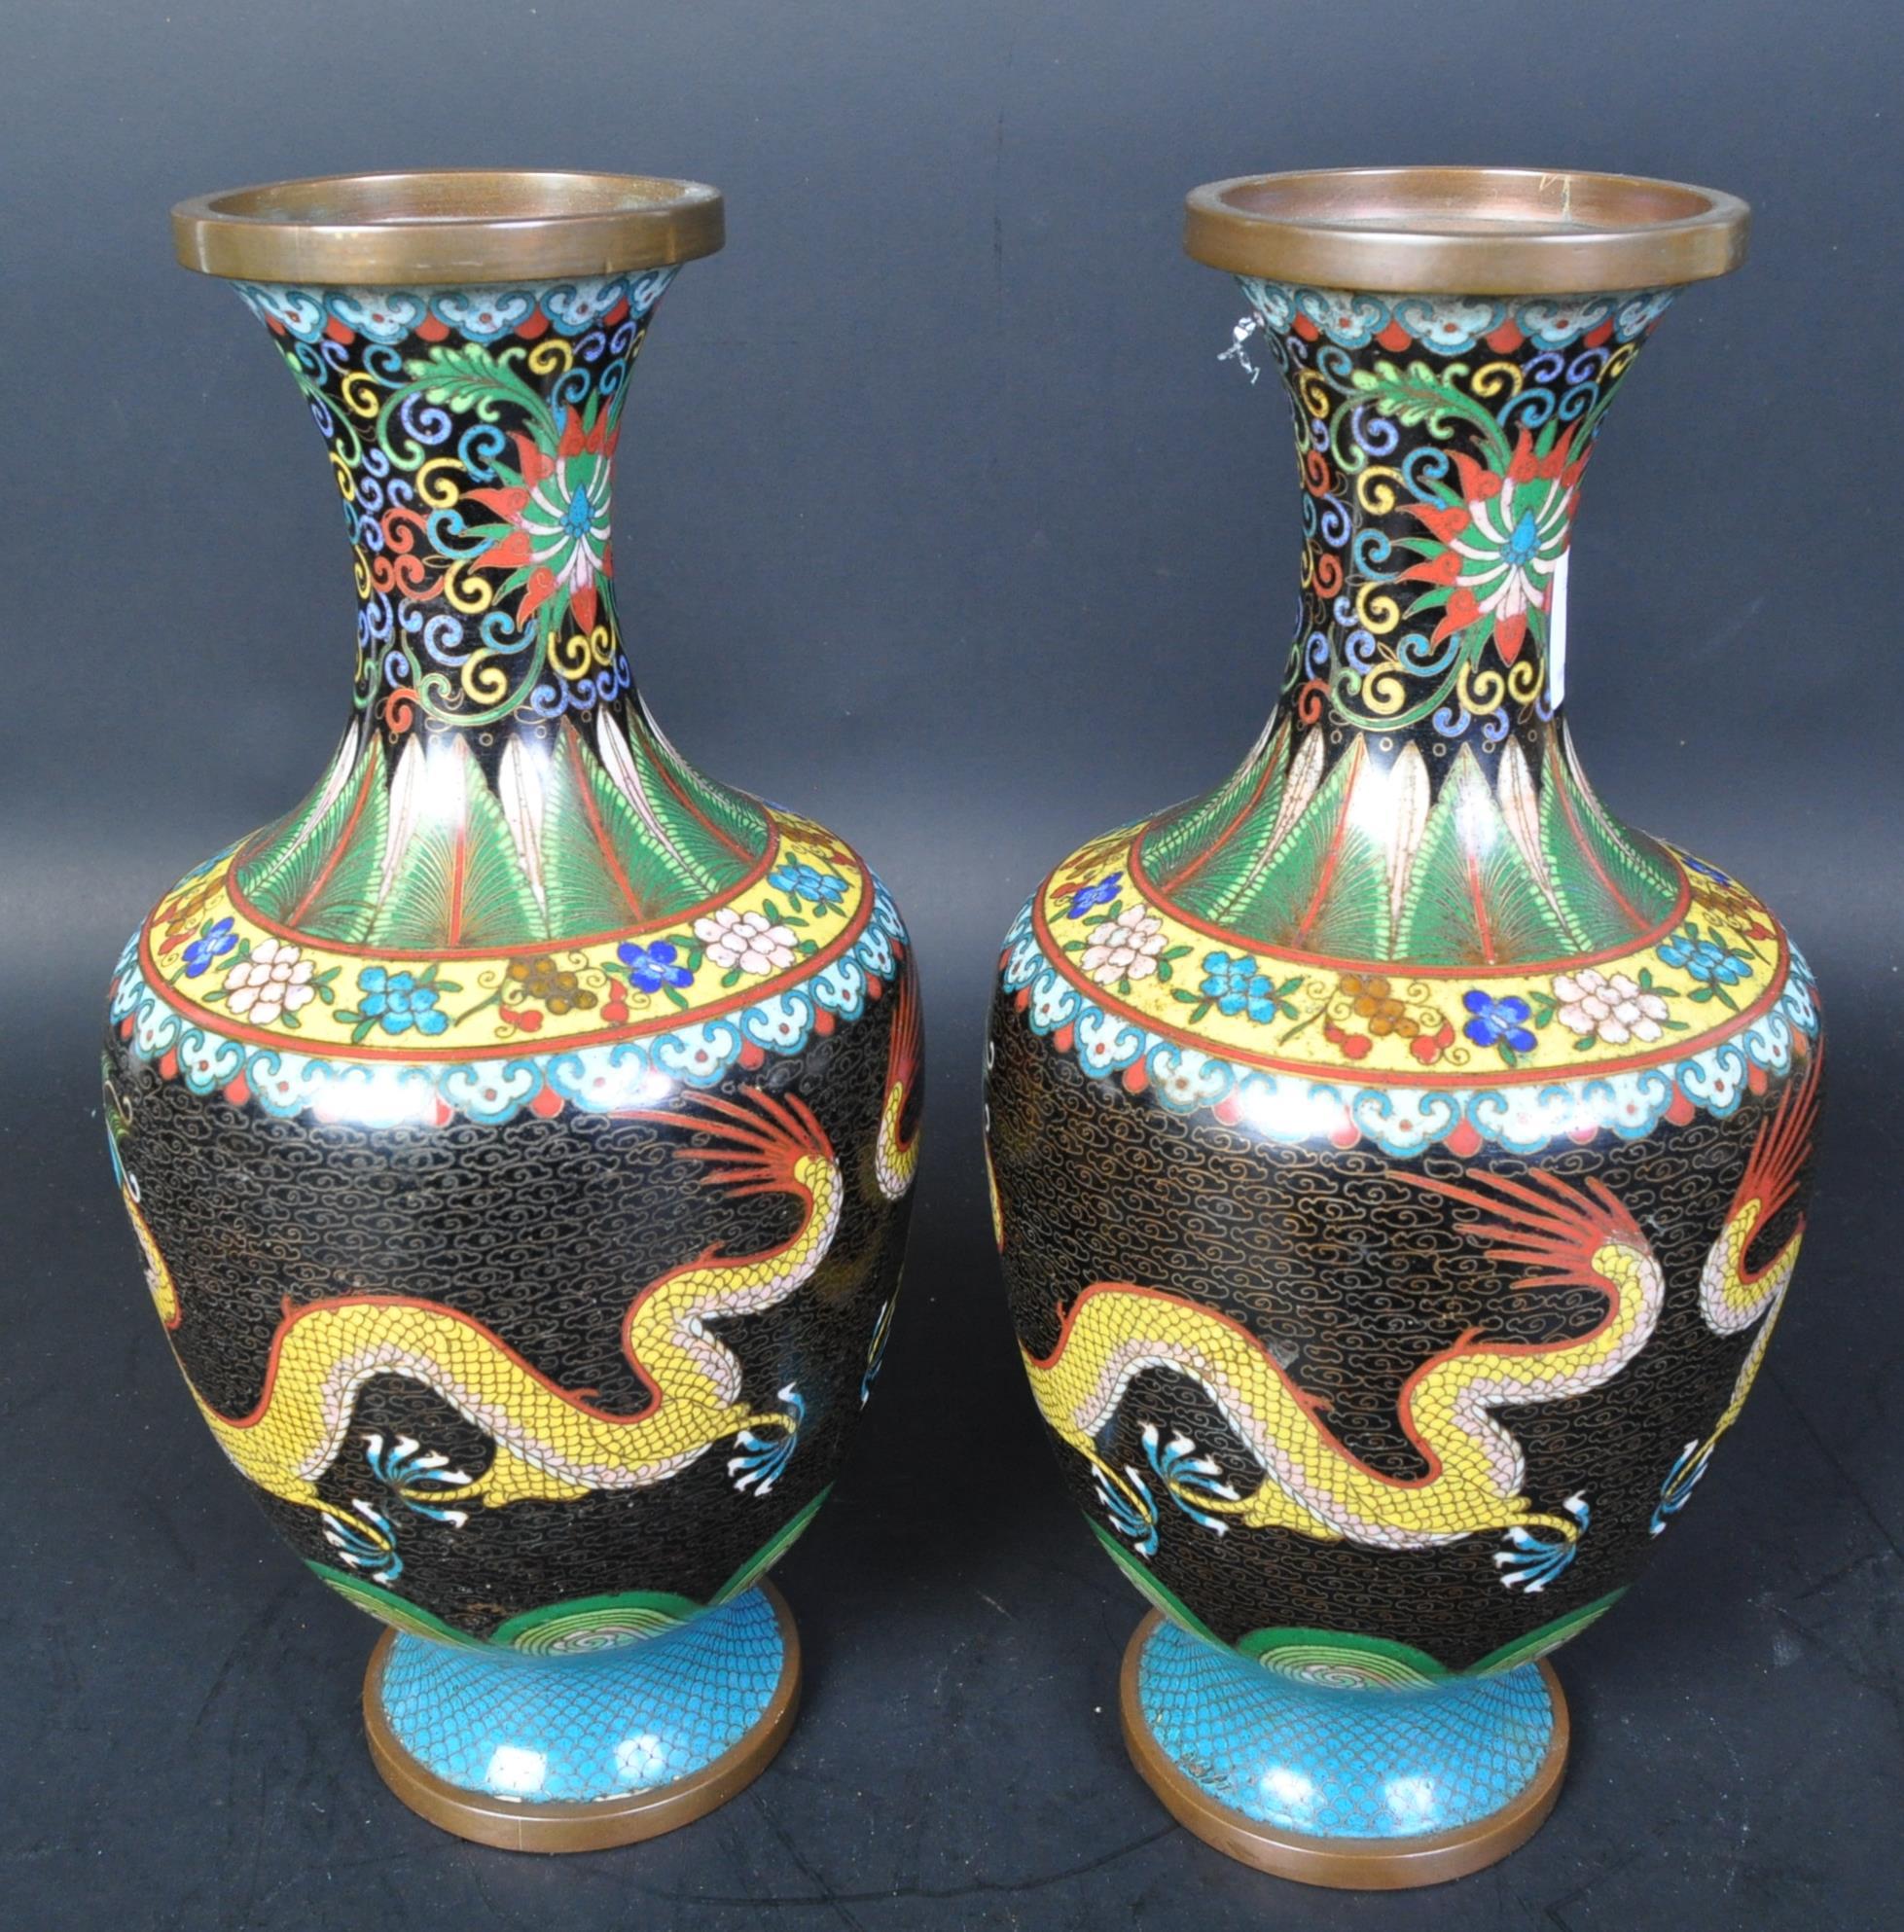 PAIR OF 1920S CHINESE CLOISONNE ENAMEL VASES - Image 4 of 5